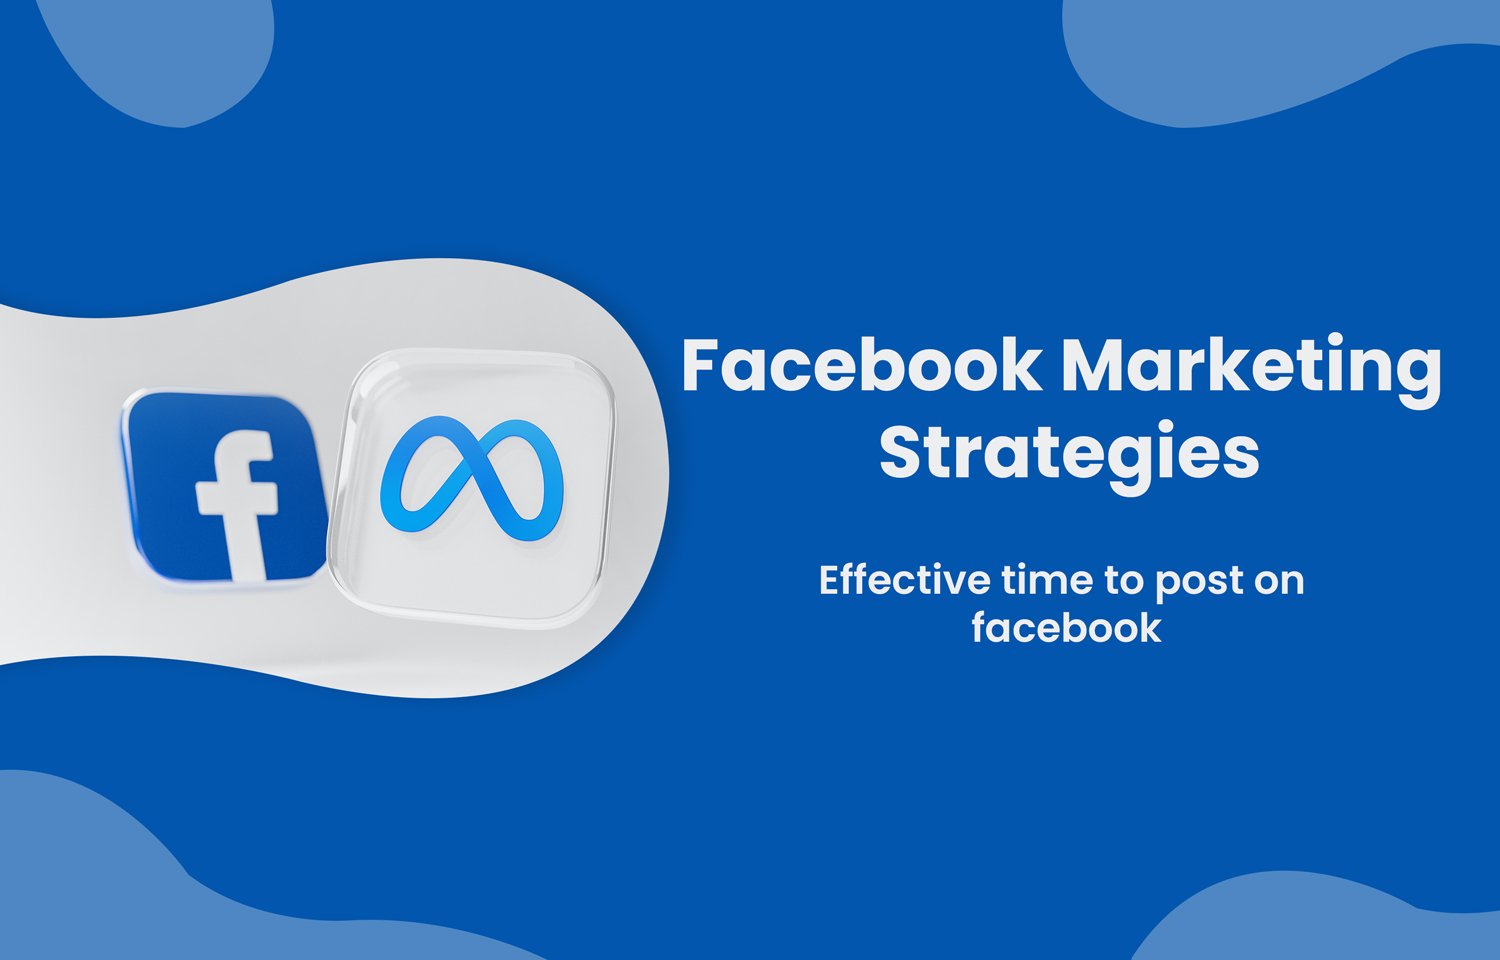 Digital Marketing Through Facebook: Best Time To Post On Facebook In 2022   Image